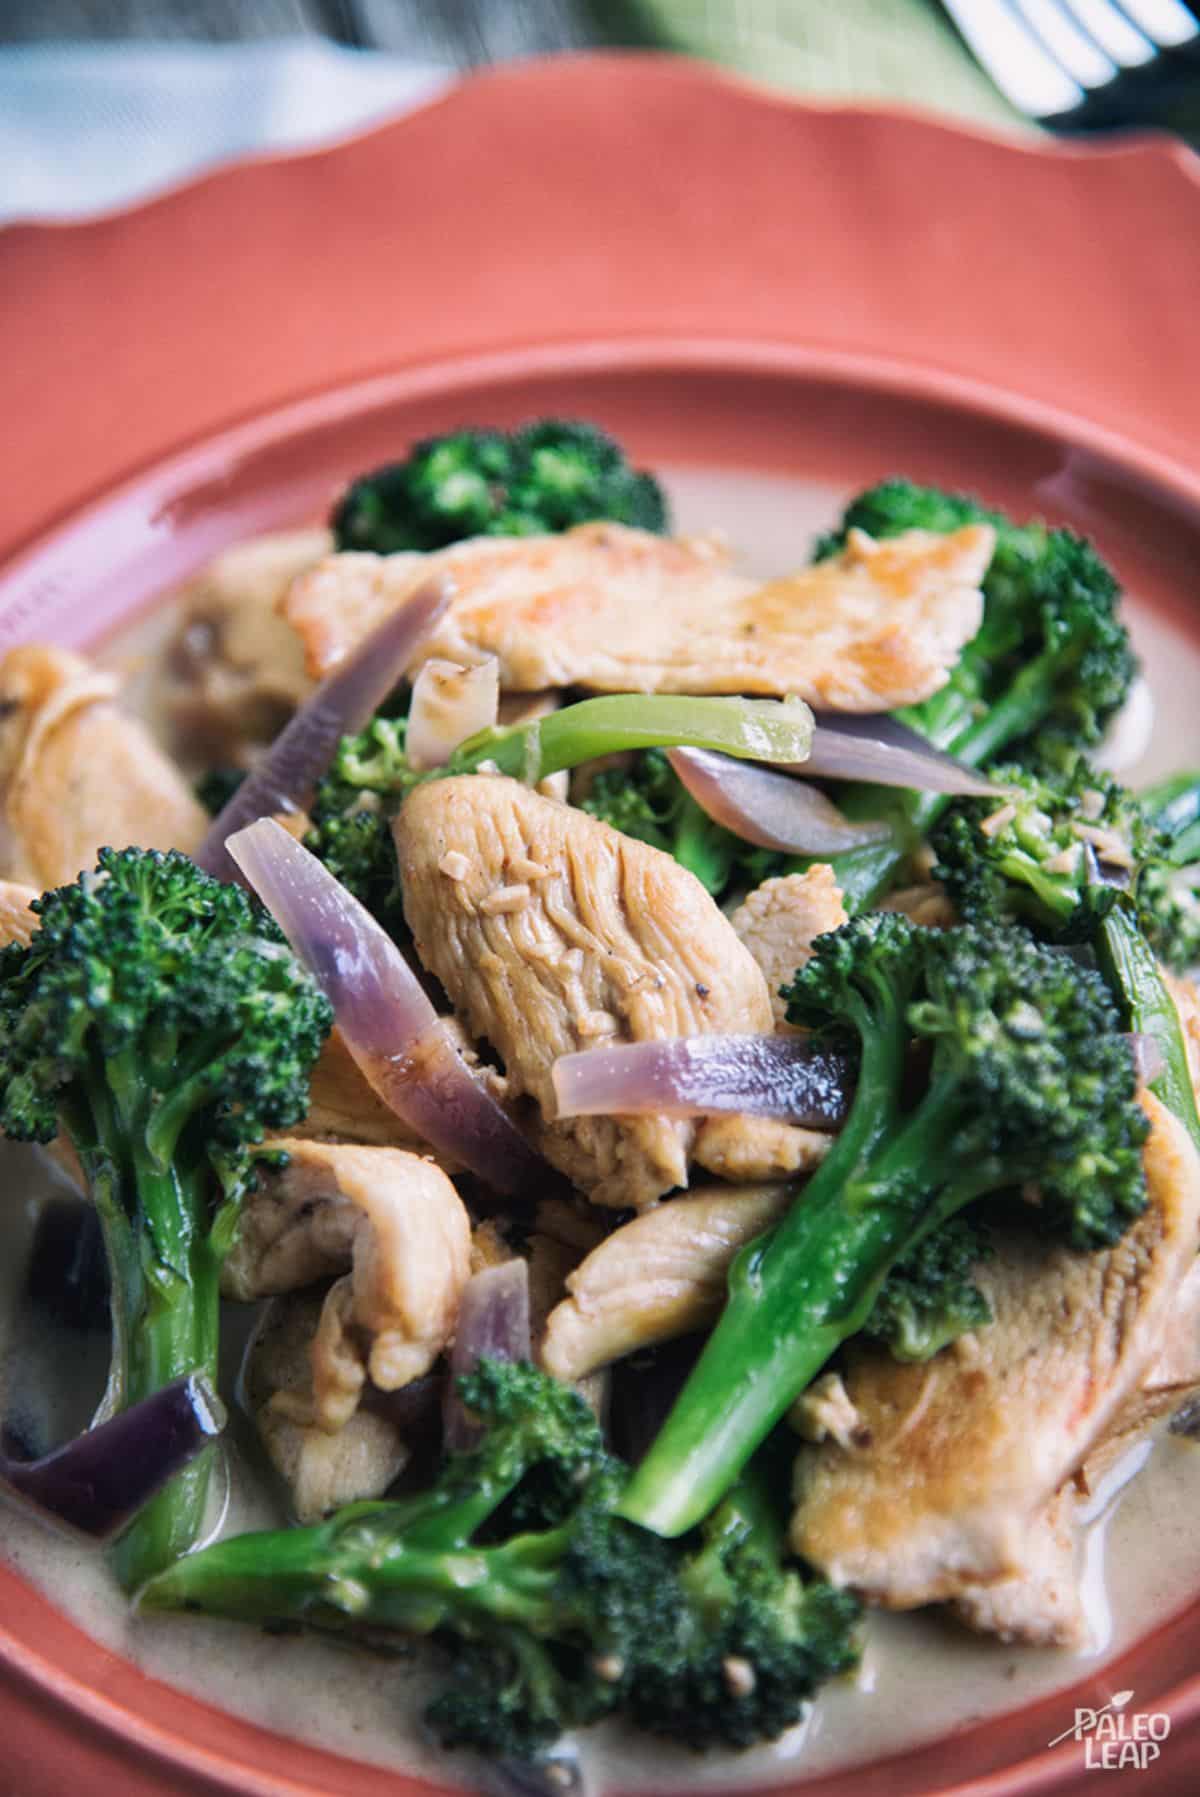 Chicken and Broccoli with Creamy Garlic Sauce